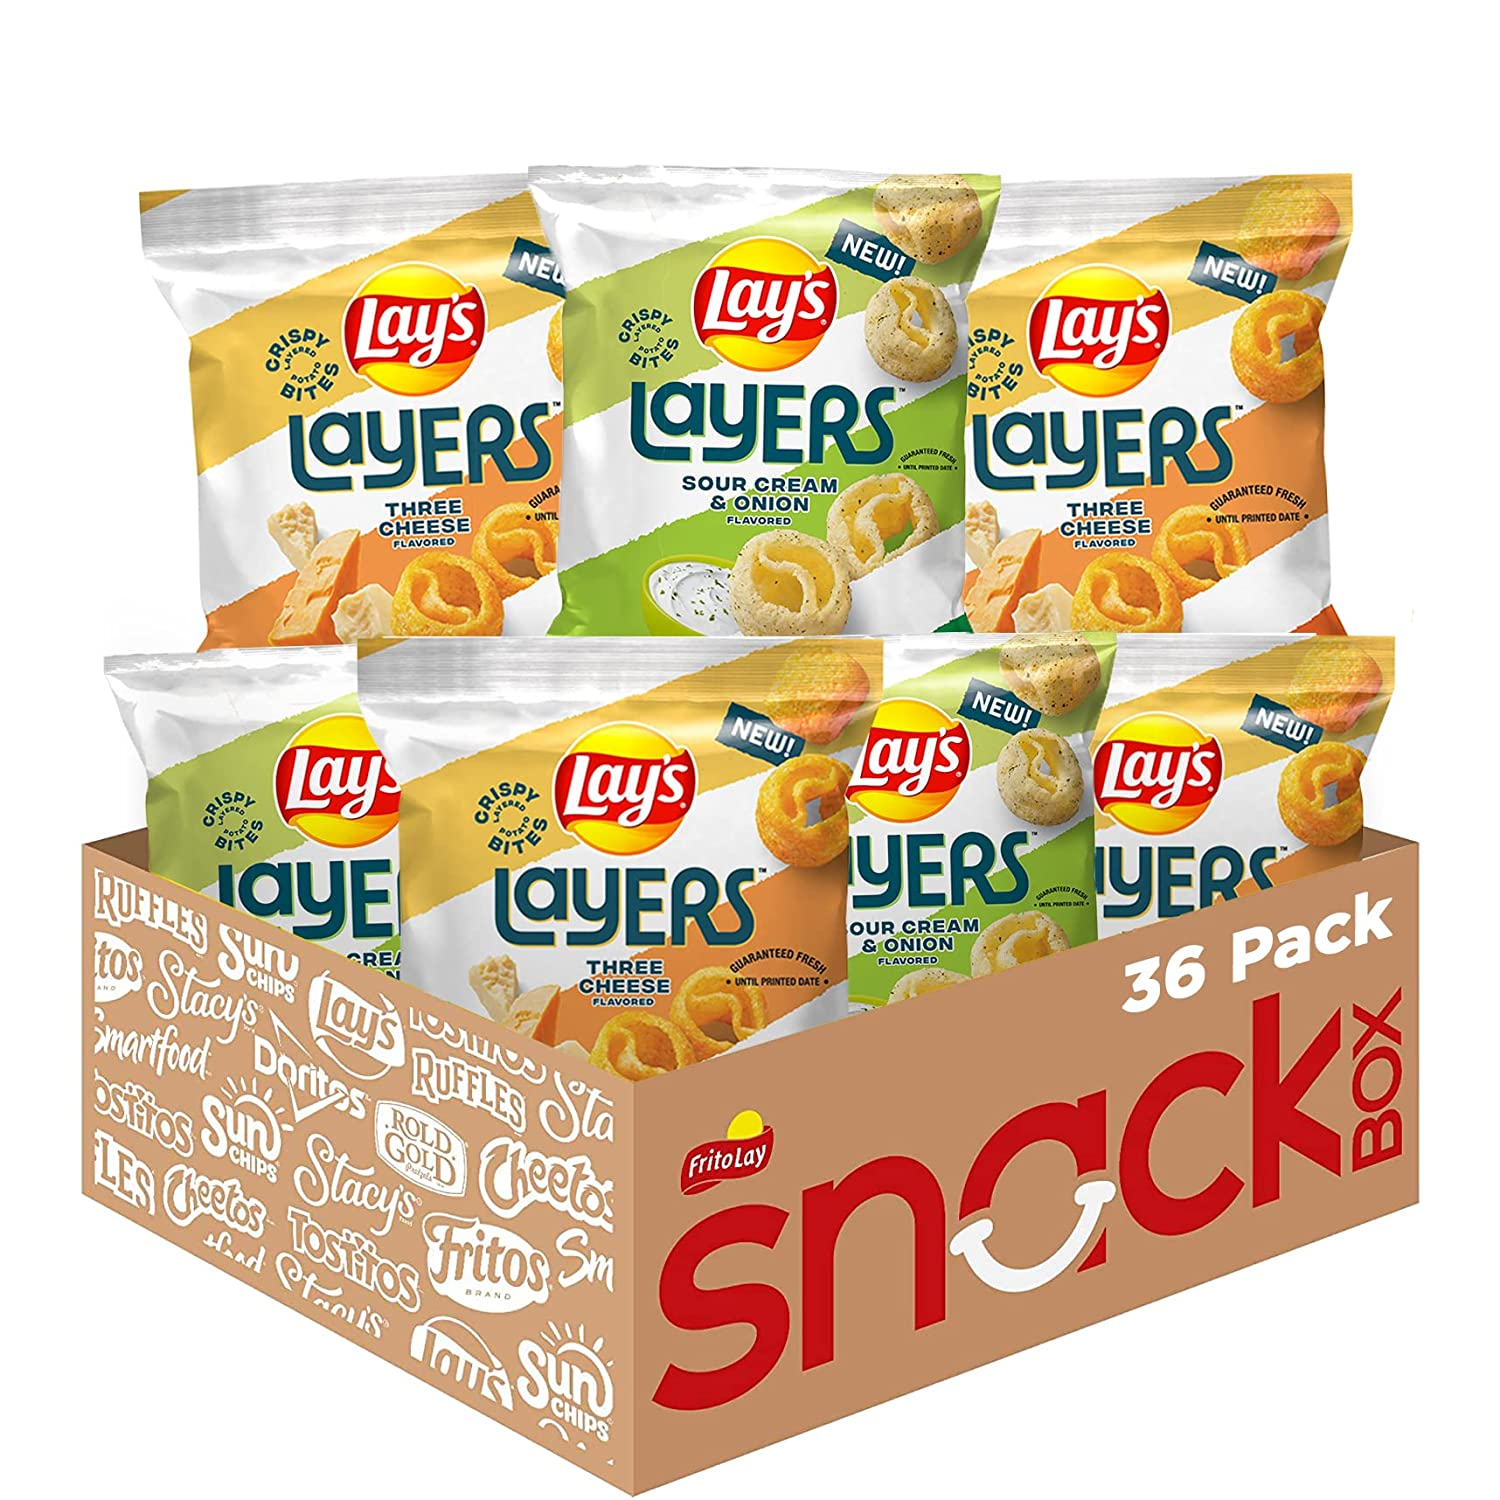 Lay'S Potato Chip Variety Pack, 1 Ounce (Pack of 40)